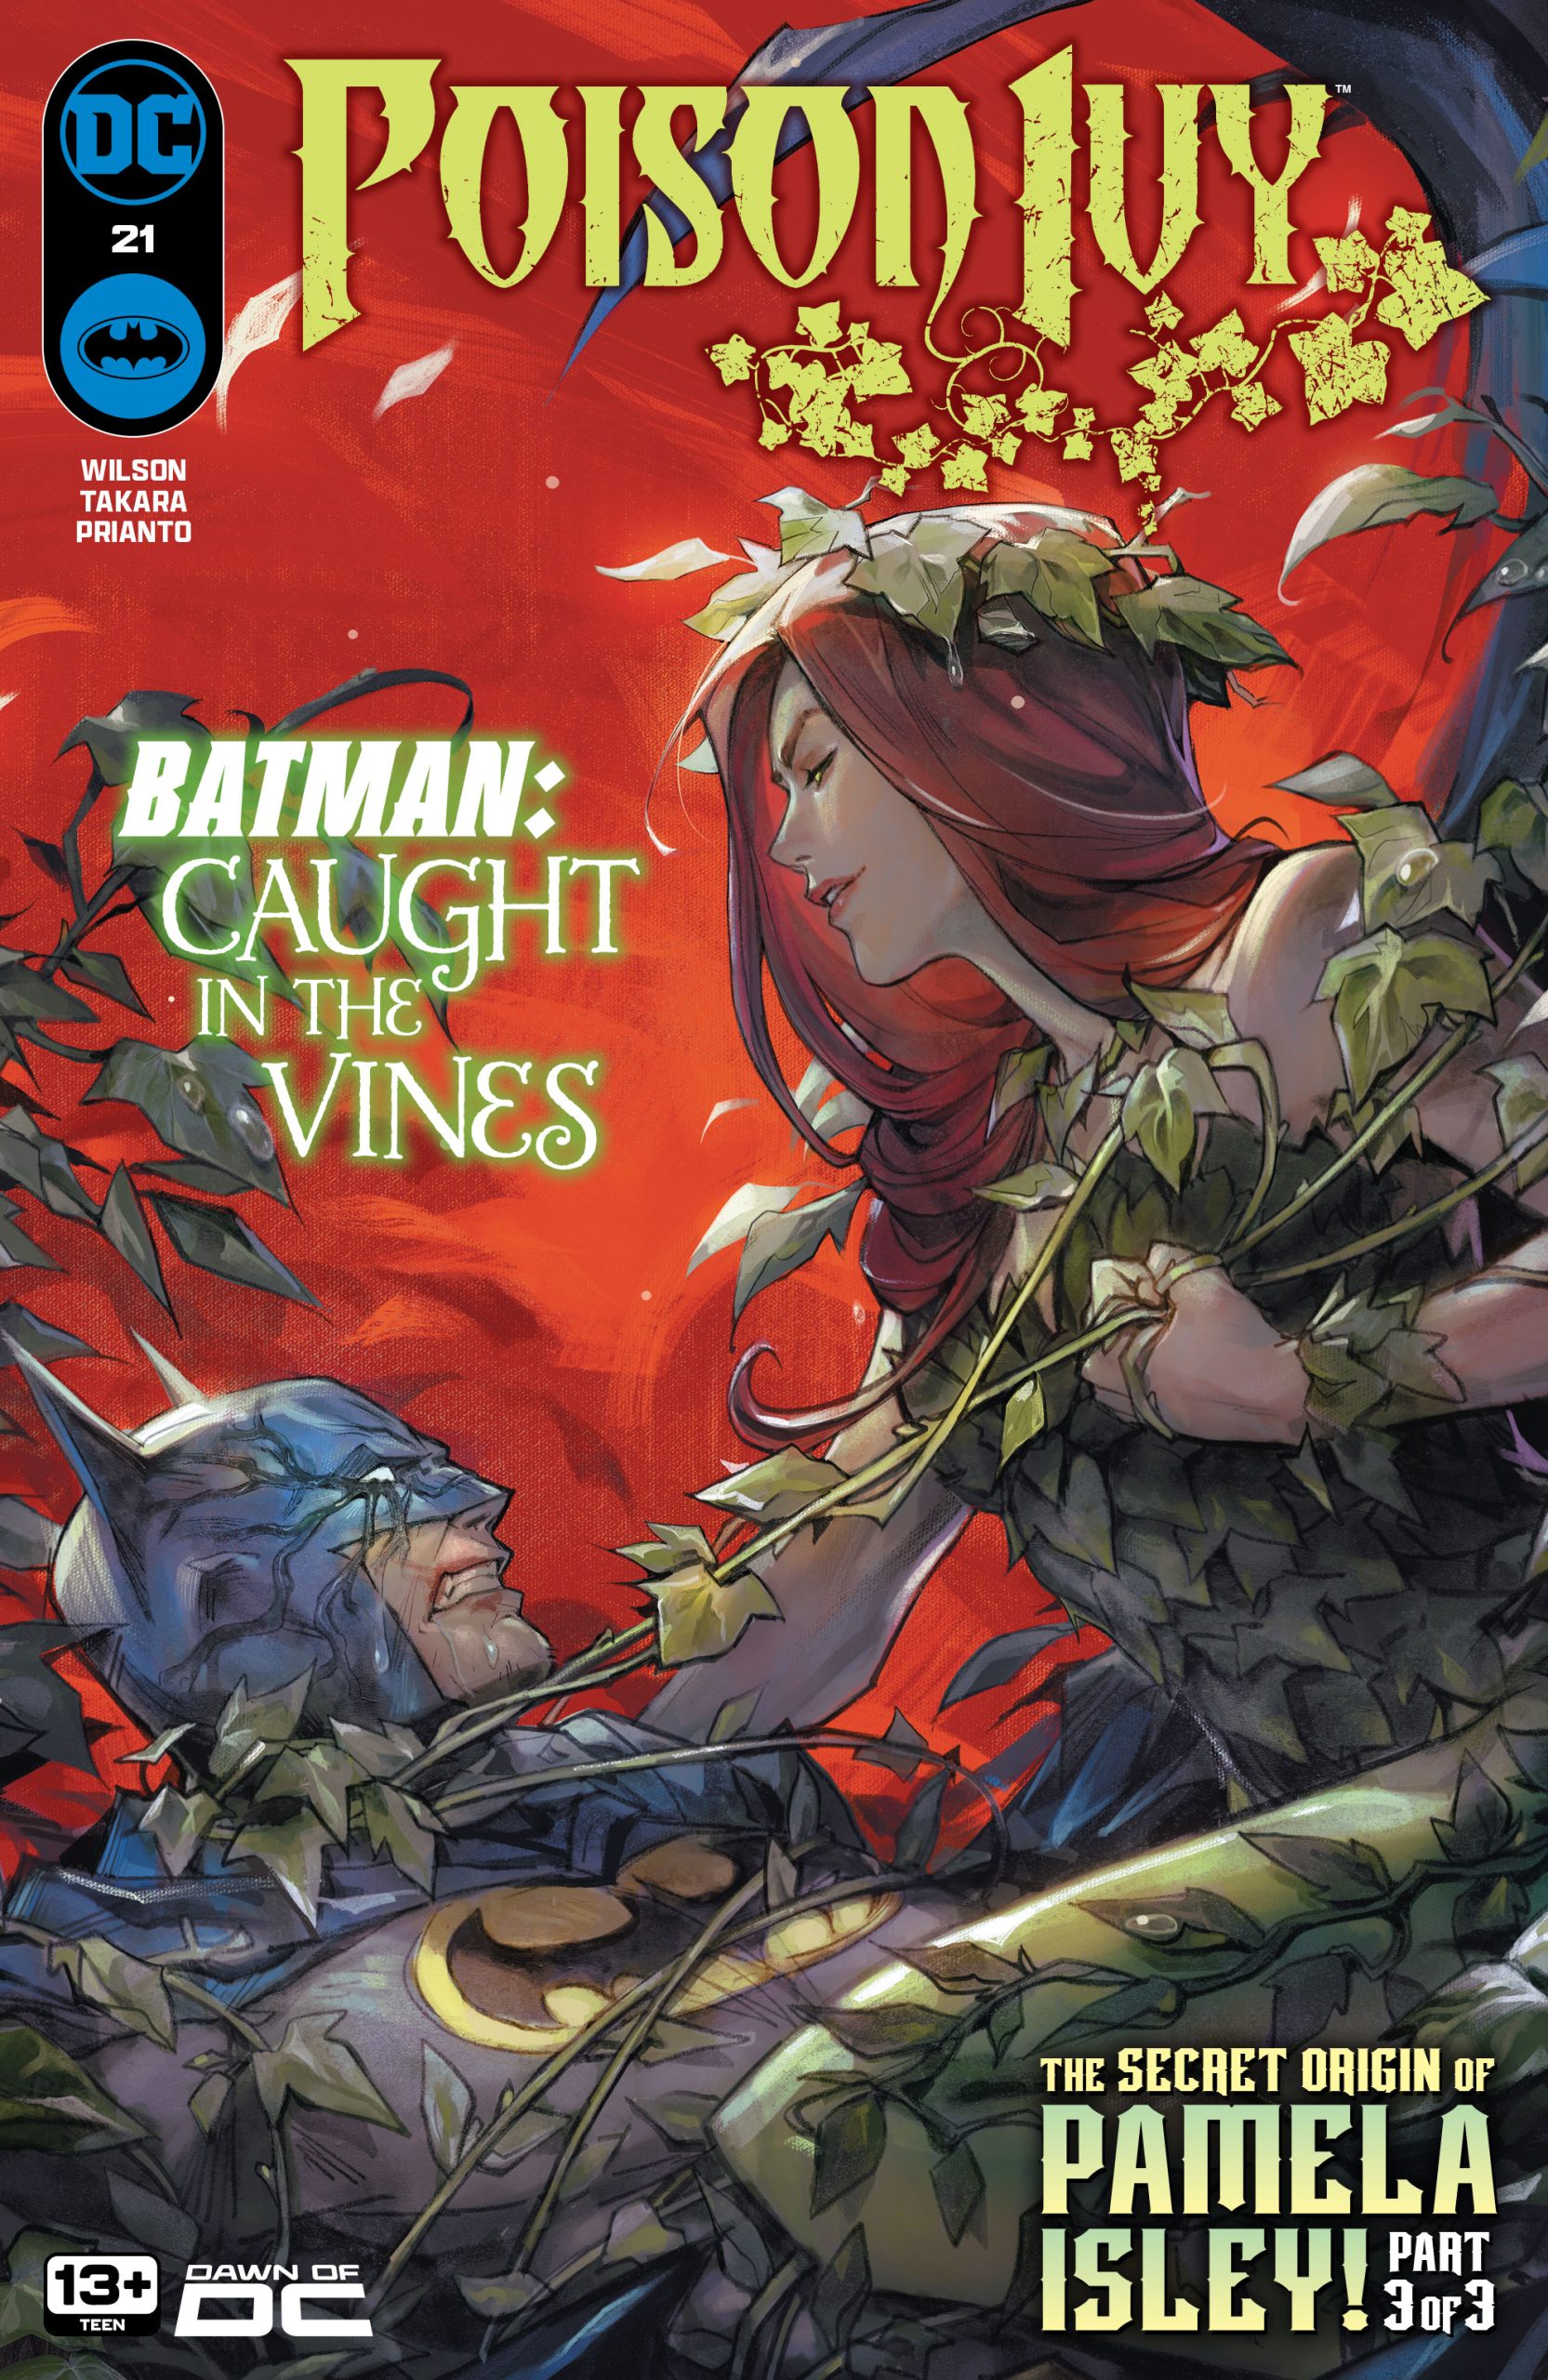 DC Preview: Poison Ivy #21